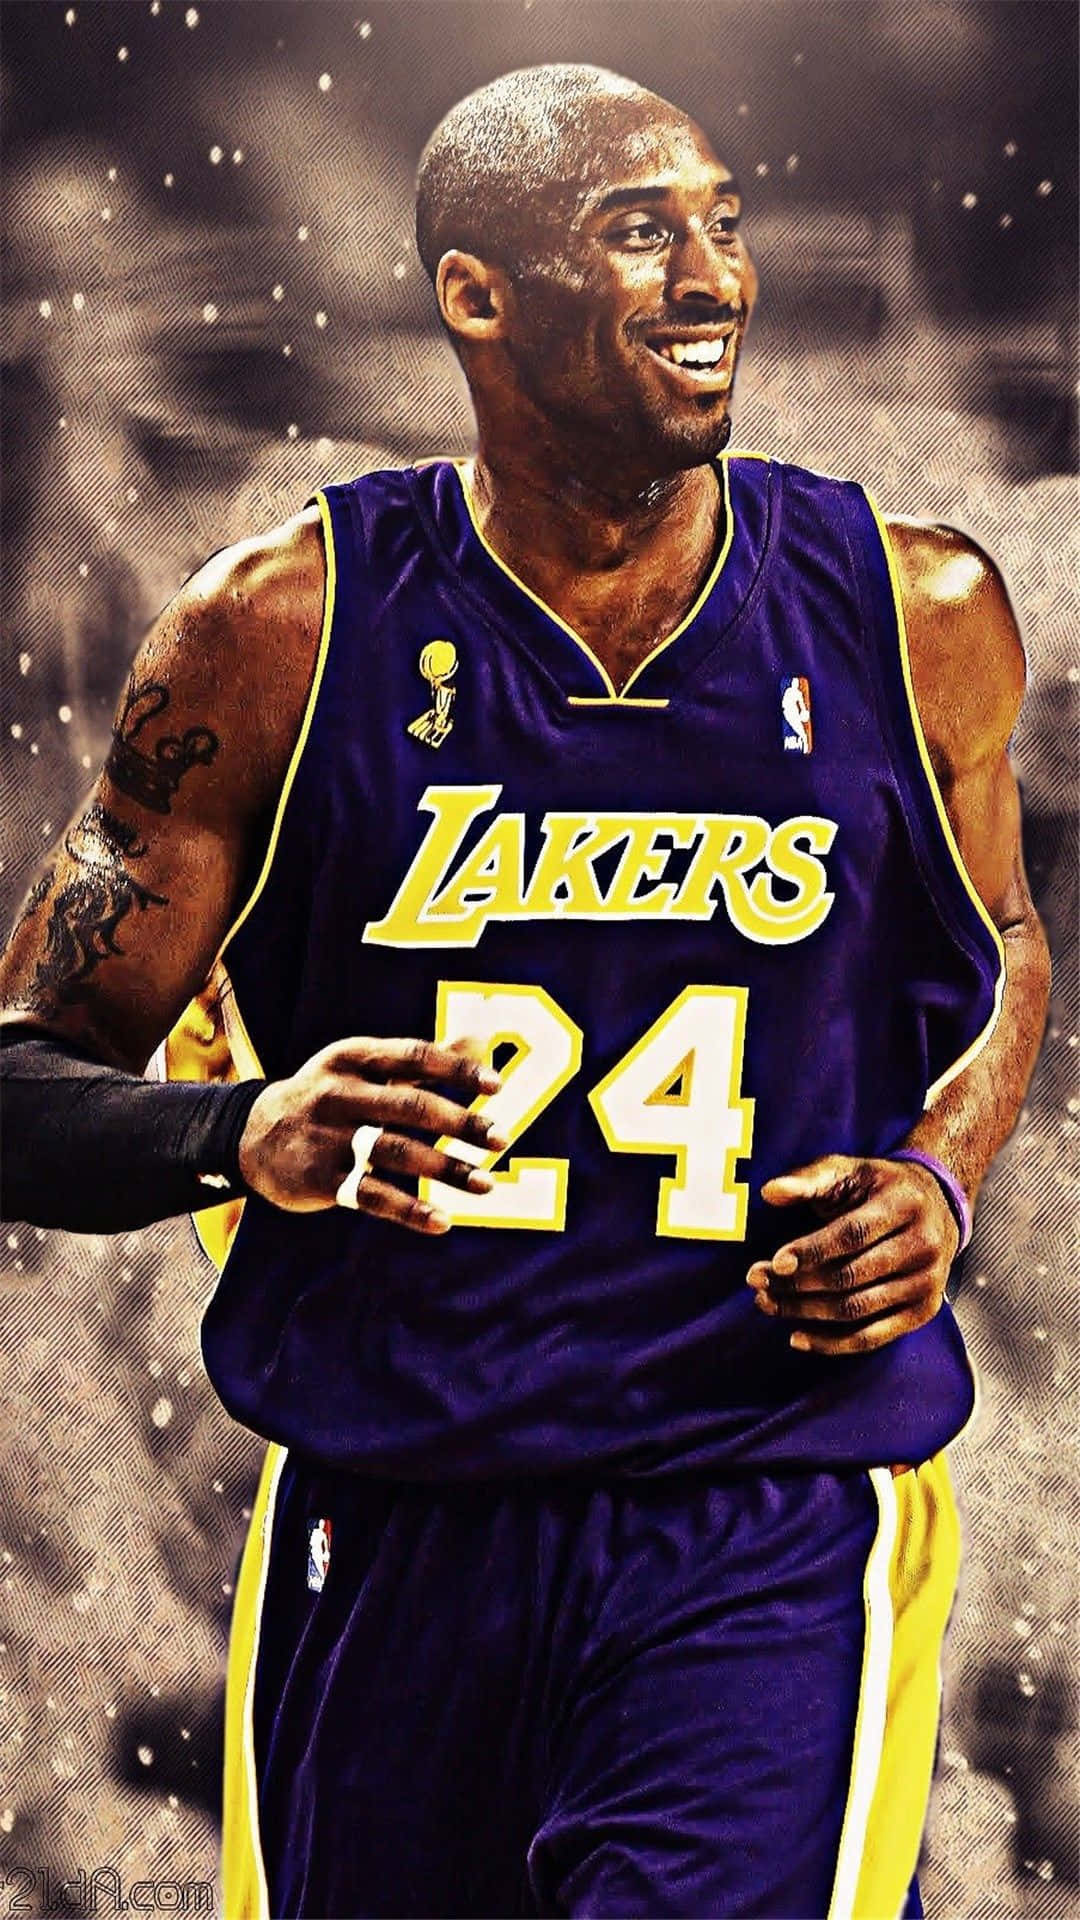 Kobe Bryany - A symbol of excellence in basketball Wallpaper